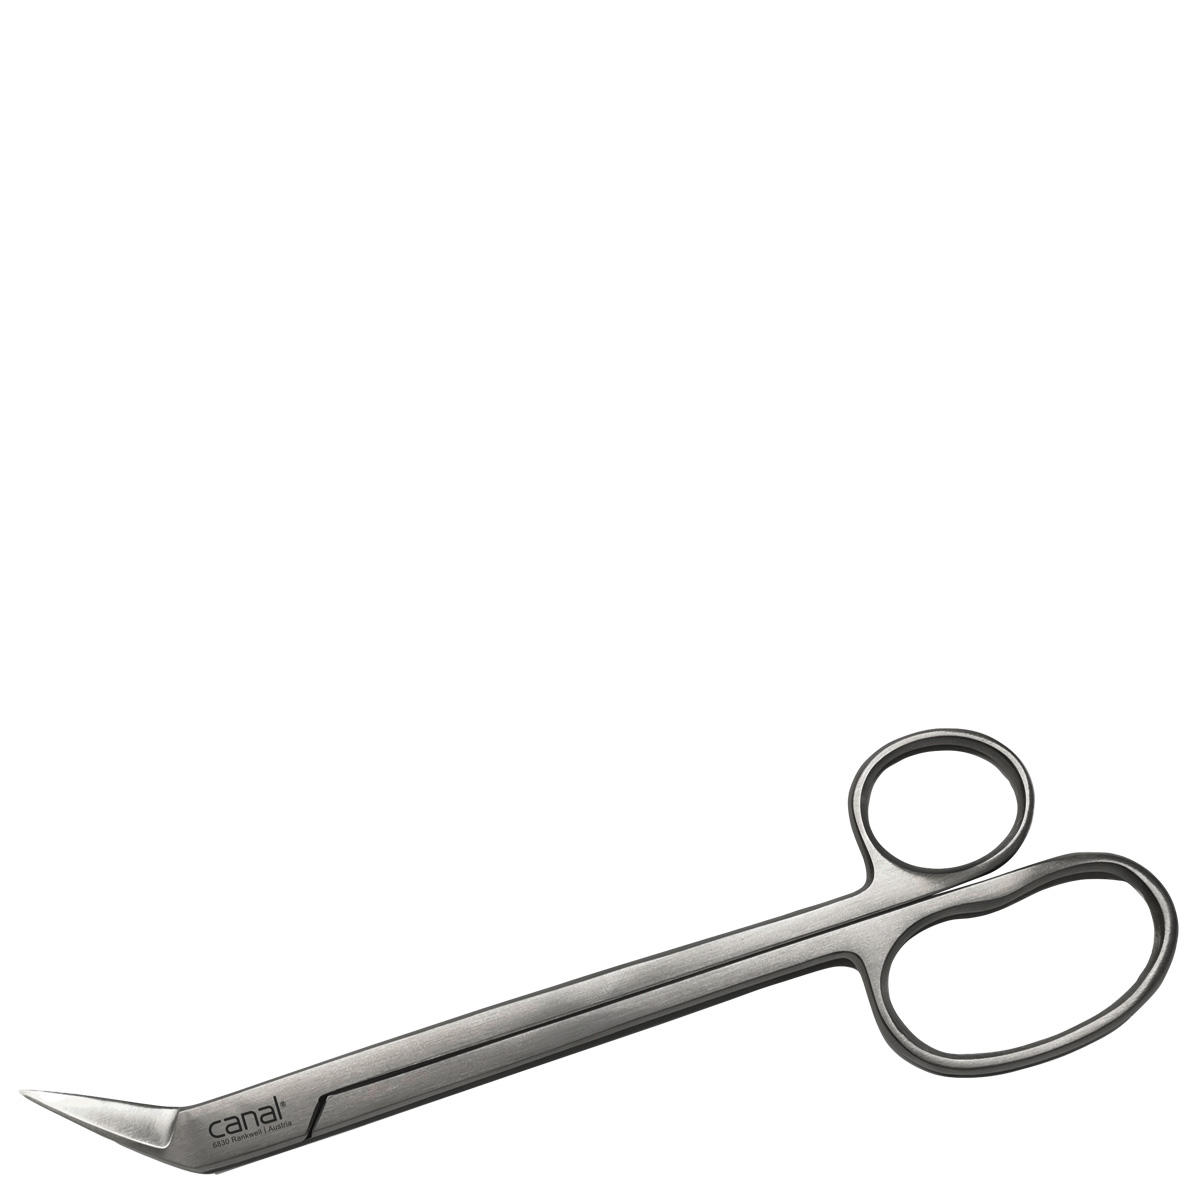 Canal Toenail scissors with long handle  - 1